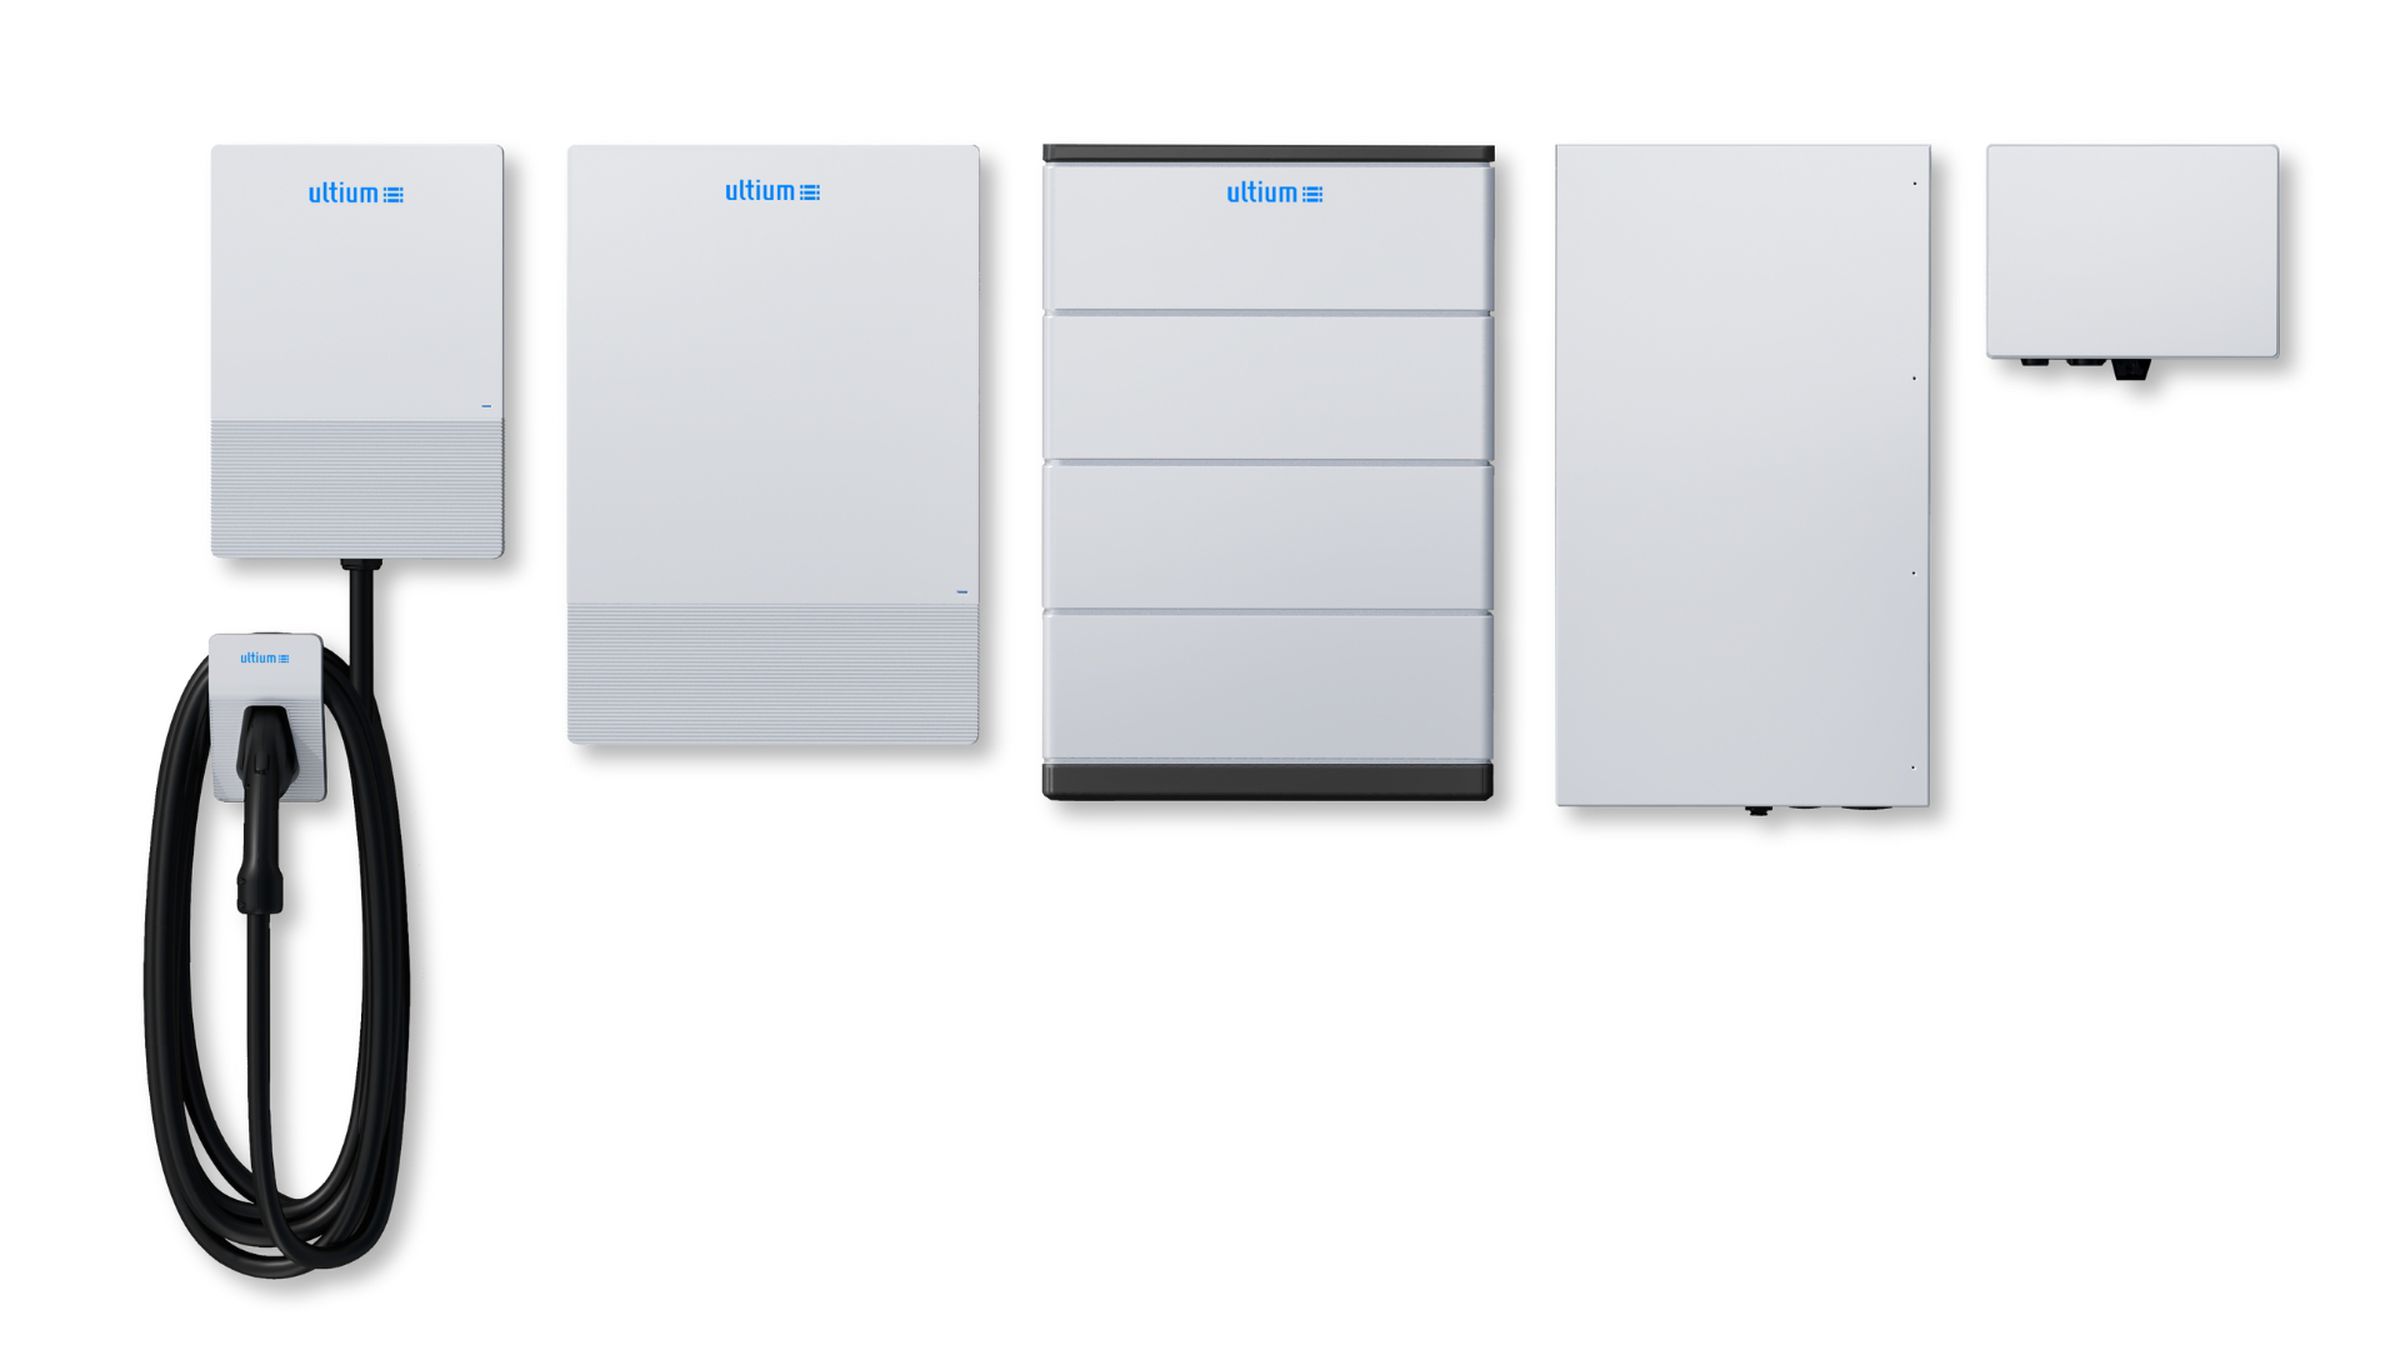 The GM Energy Ultium Home Energy System bundle against a white background.